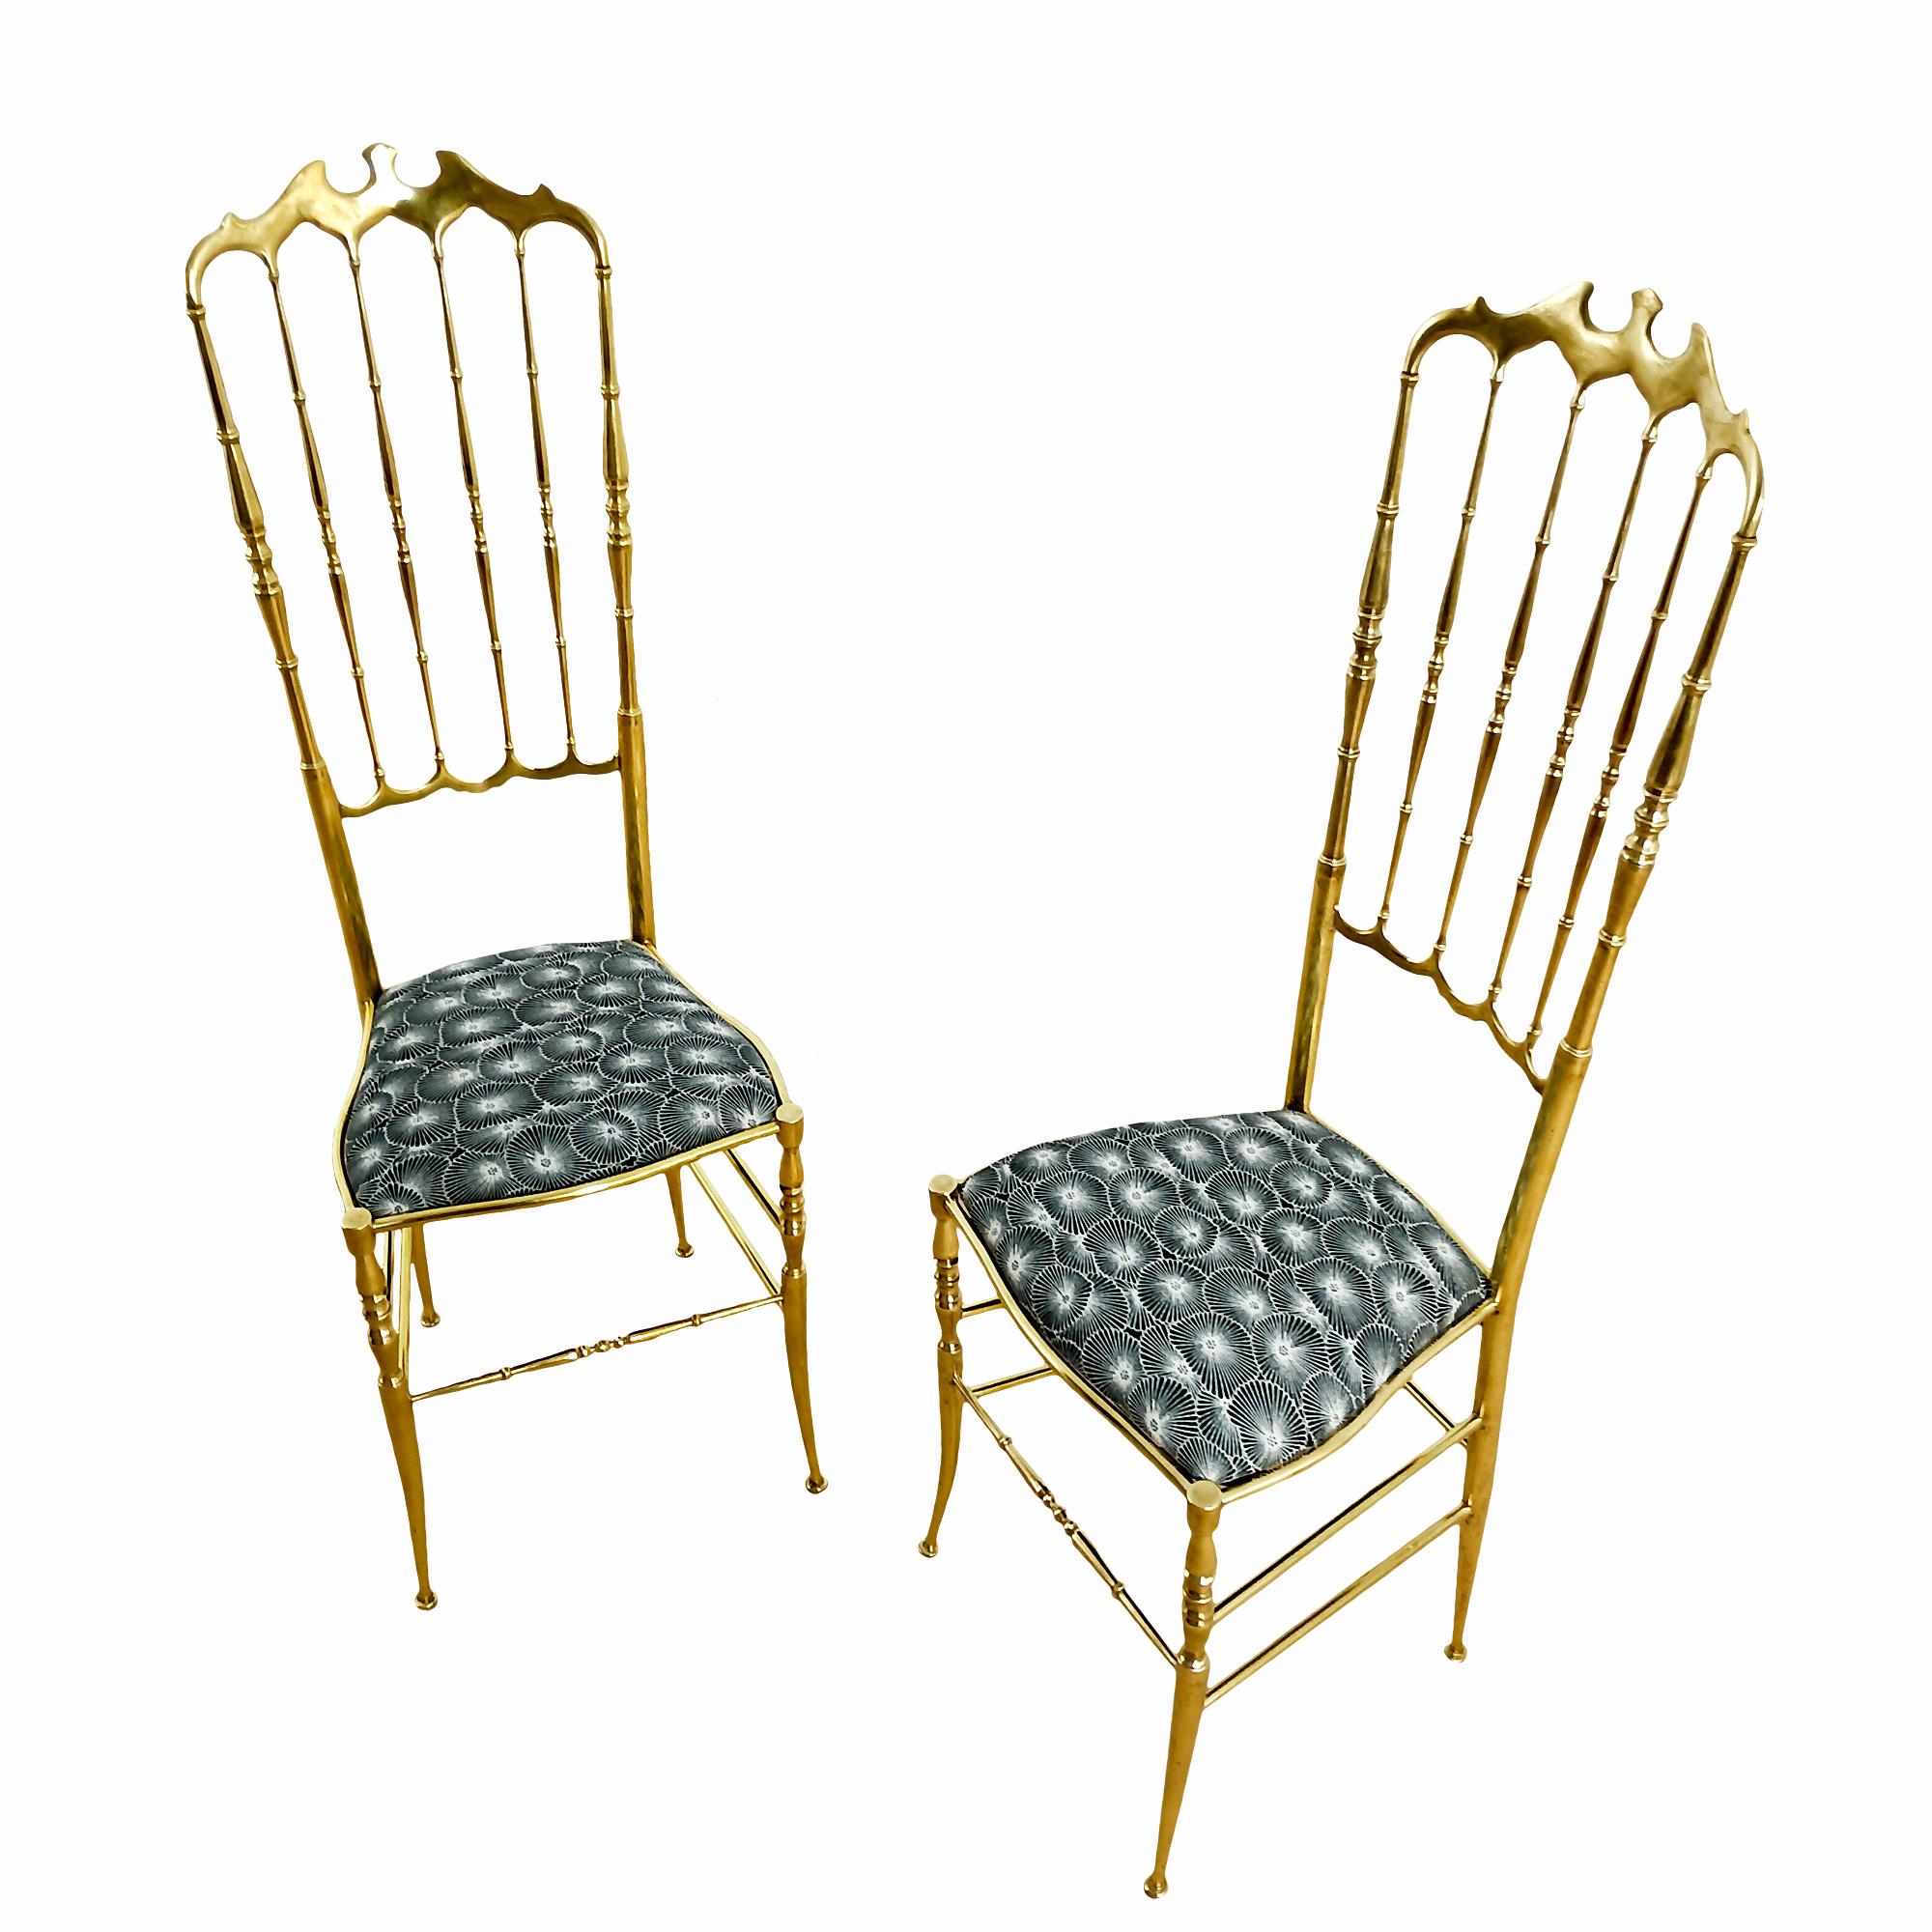 Pair of Chiavari chairs with high backs, polished solid brass, seats refurbished in Japanese fabric.
Italy circa 1940.